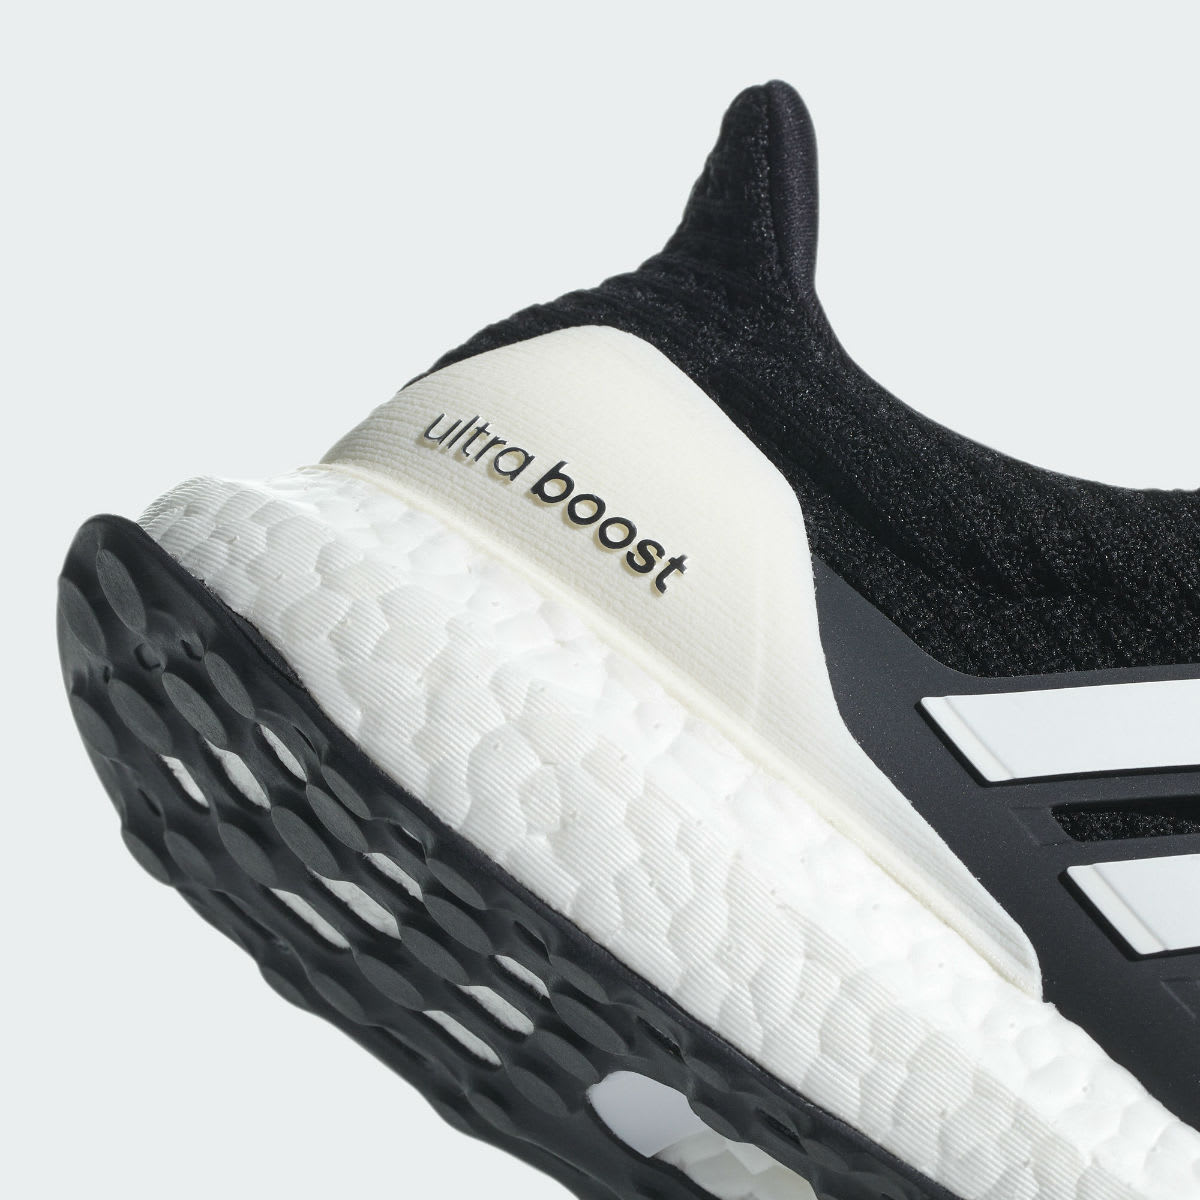 Adidas Ultra Boost 4.0 Show Your Stripes Core Black Cloud White Carbon Release date AQ0062 Heel